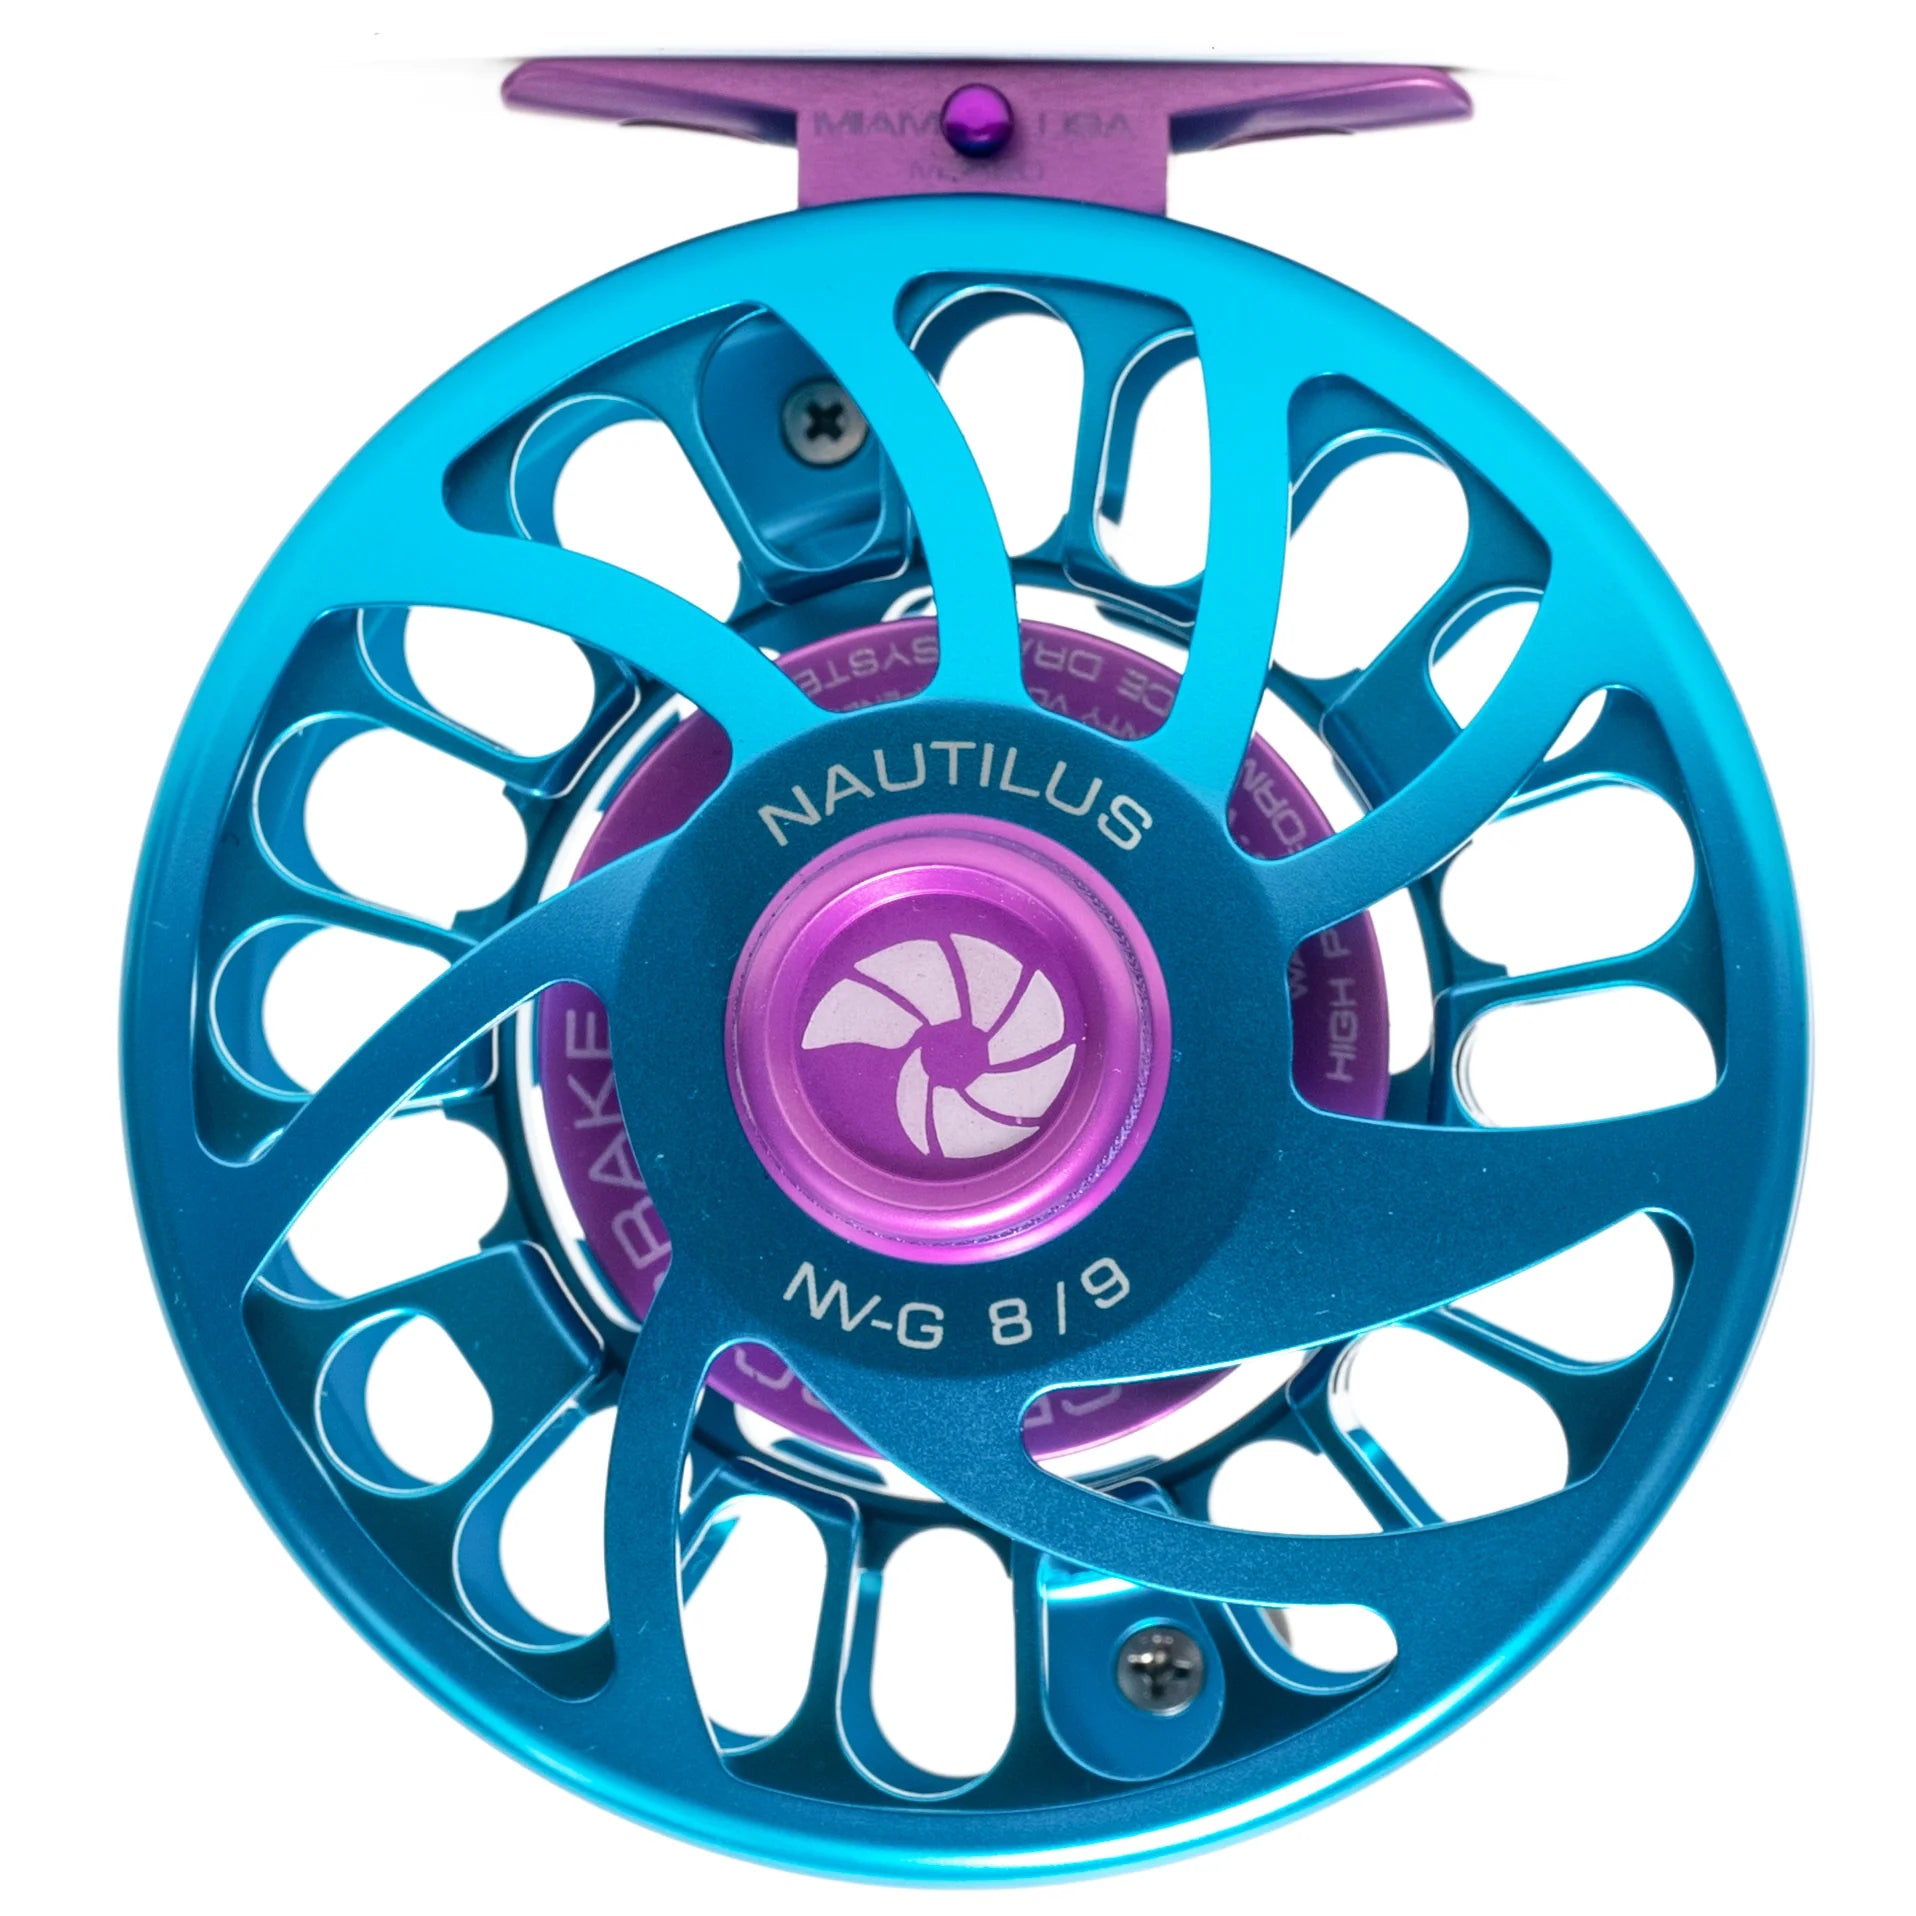 Nautilus NV-G Turquoise 8/9 Fly Reel - Full Custom with Violet/Purple color accent parts